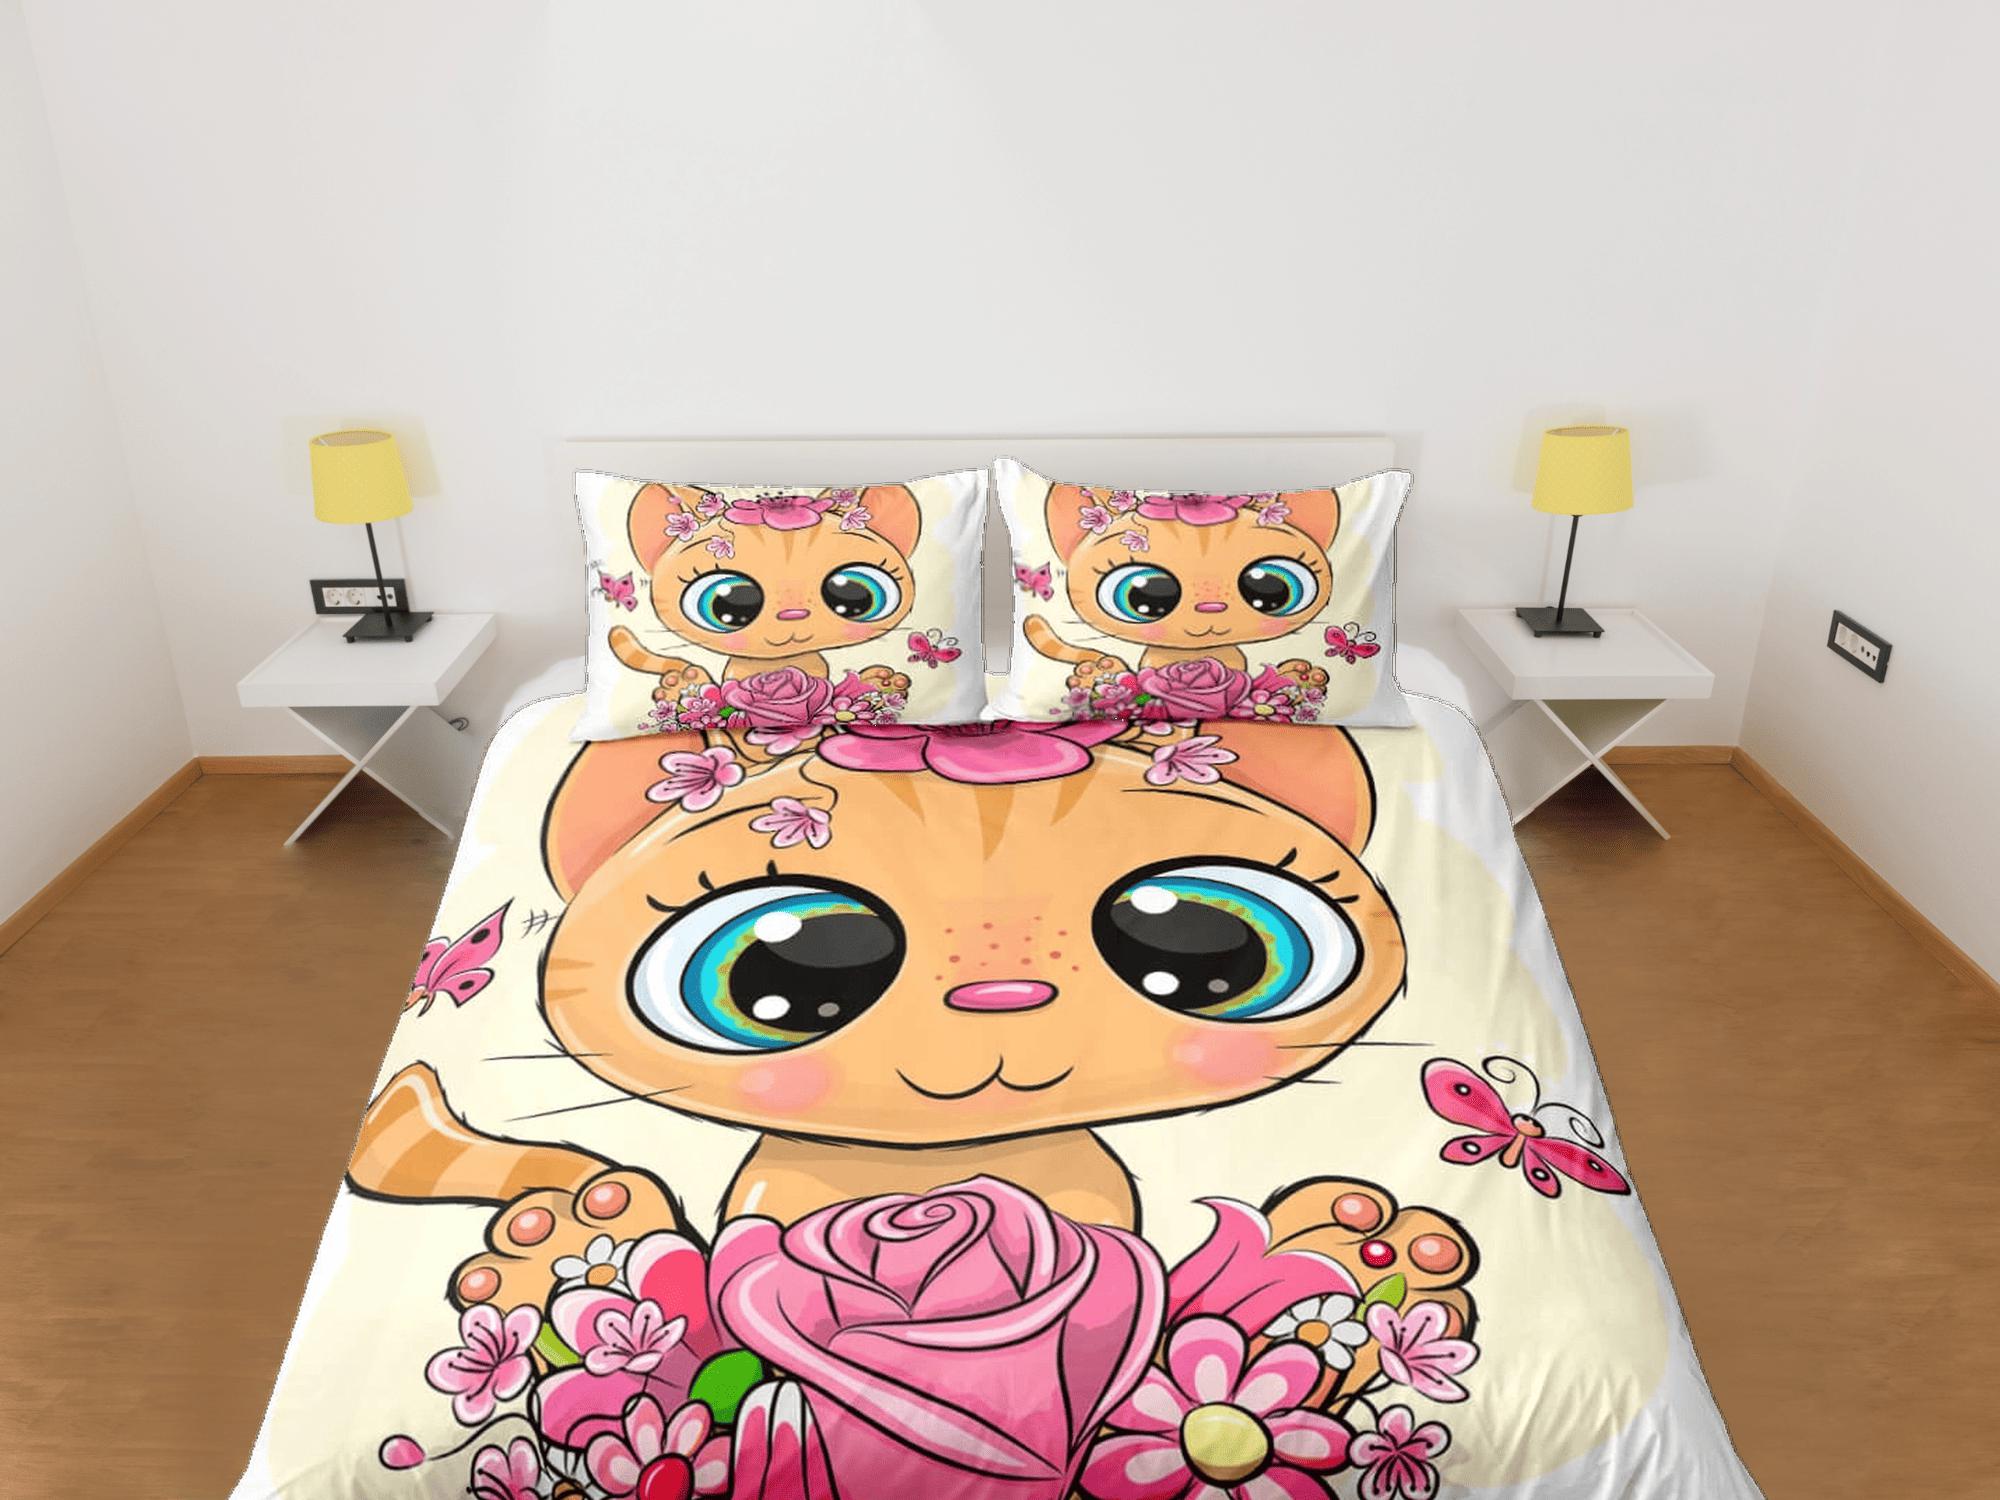 daintyduvet Cute Floral Big Eyed Cat Bedding, Girly Toddler Bedding, Kids Duvet Cover Set, Baby Bedding, Baby Shower Doona Cover up to California King